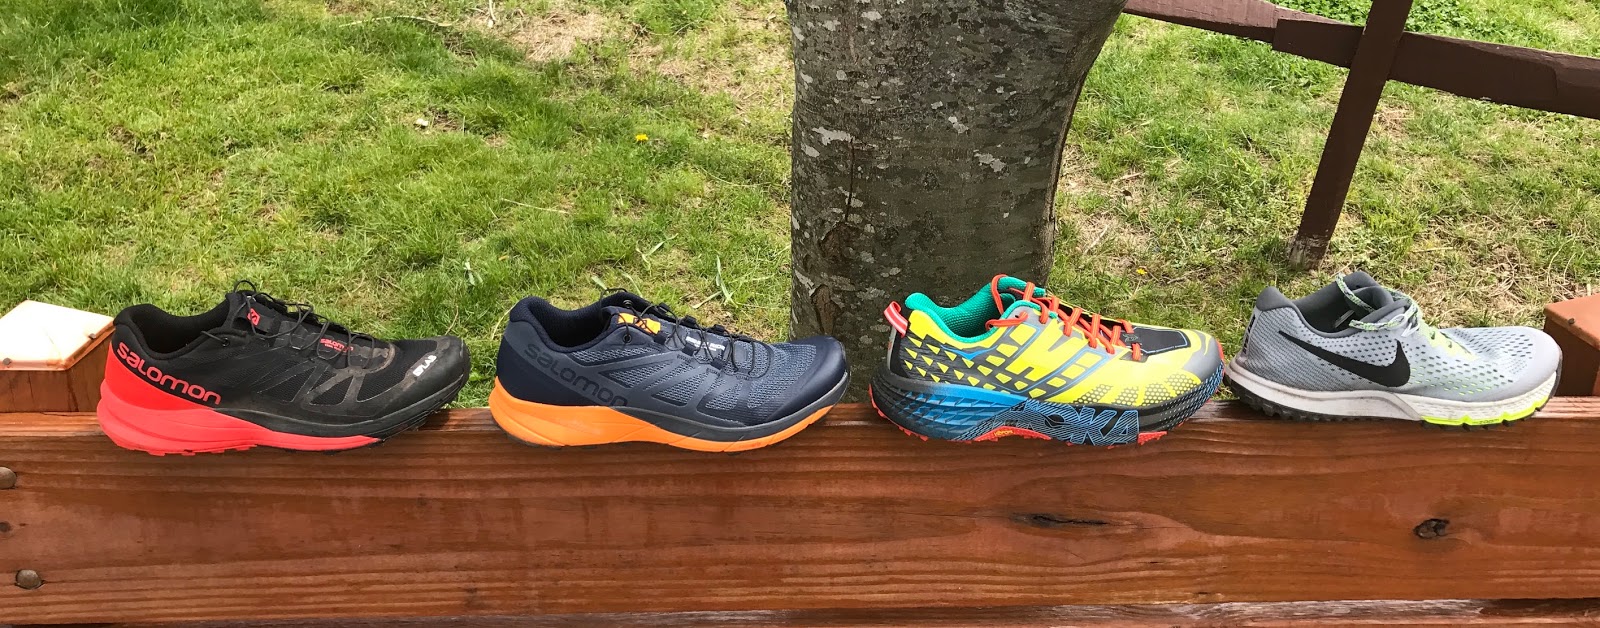 Road Trail Run: Nike Air Zoom Terra Kiger 4 Review-A Favorite Improves! Detailed Trail Comparisons to Hoka Speedgoat 2, Salomon Sense Ultra and Ride